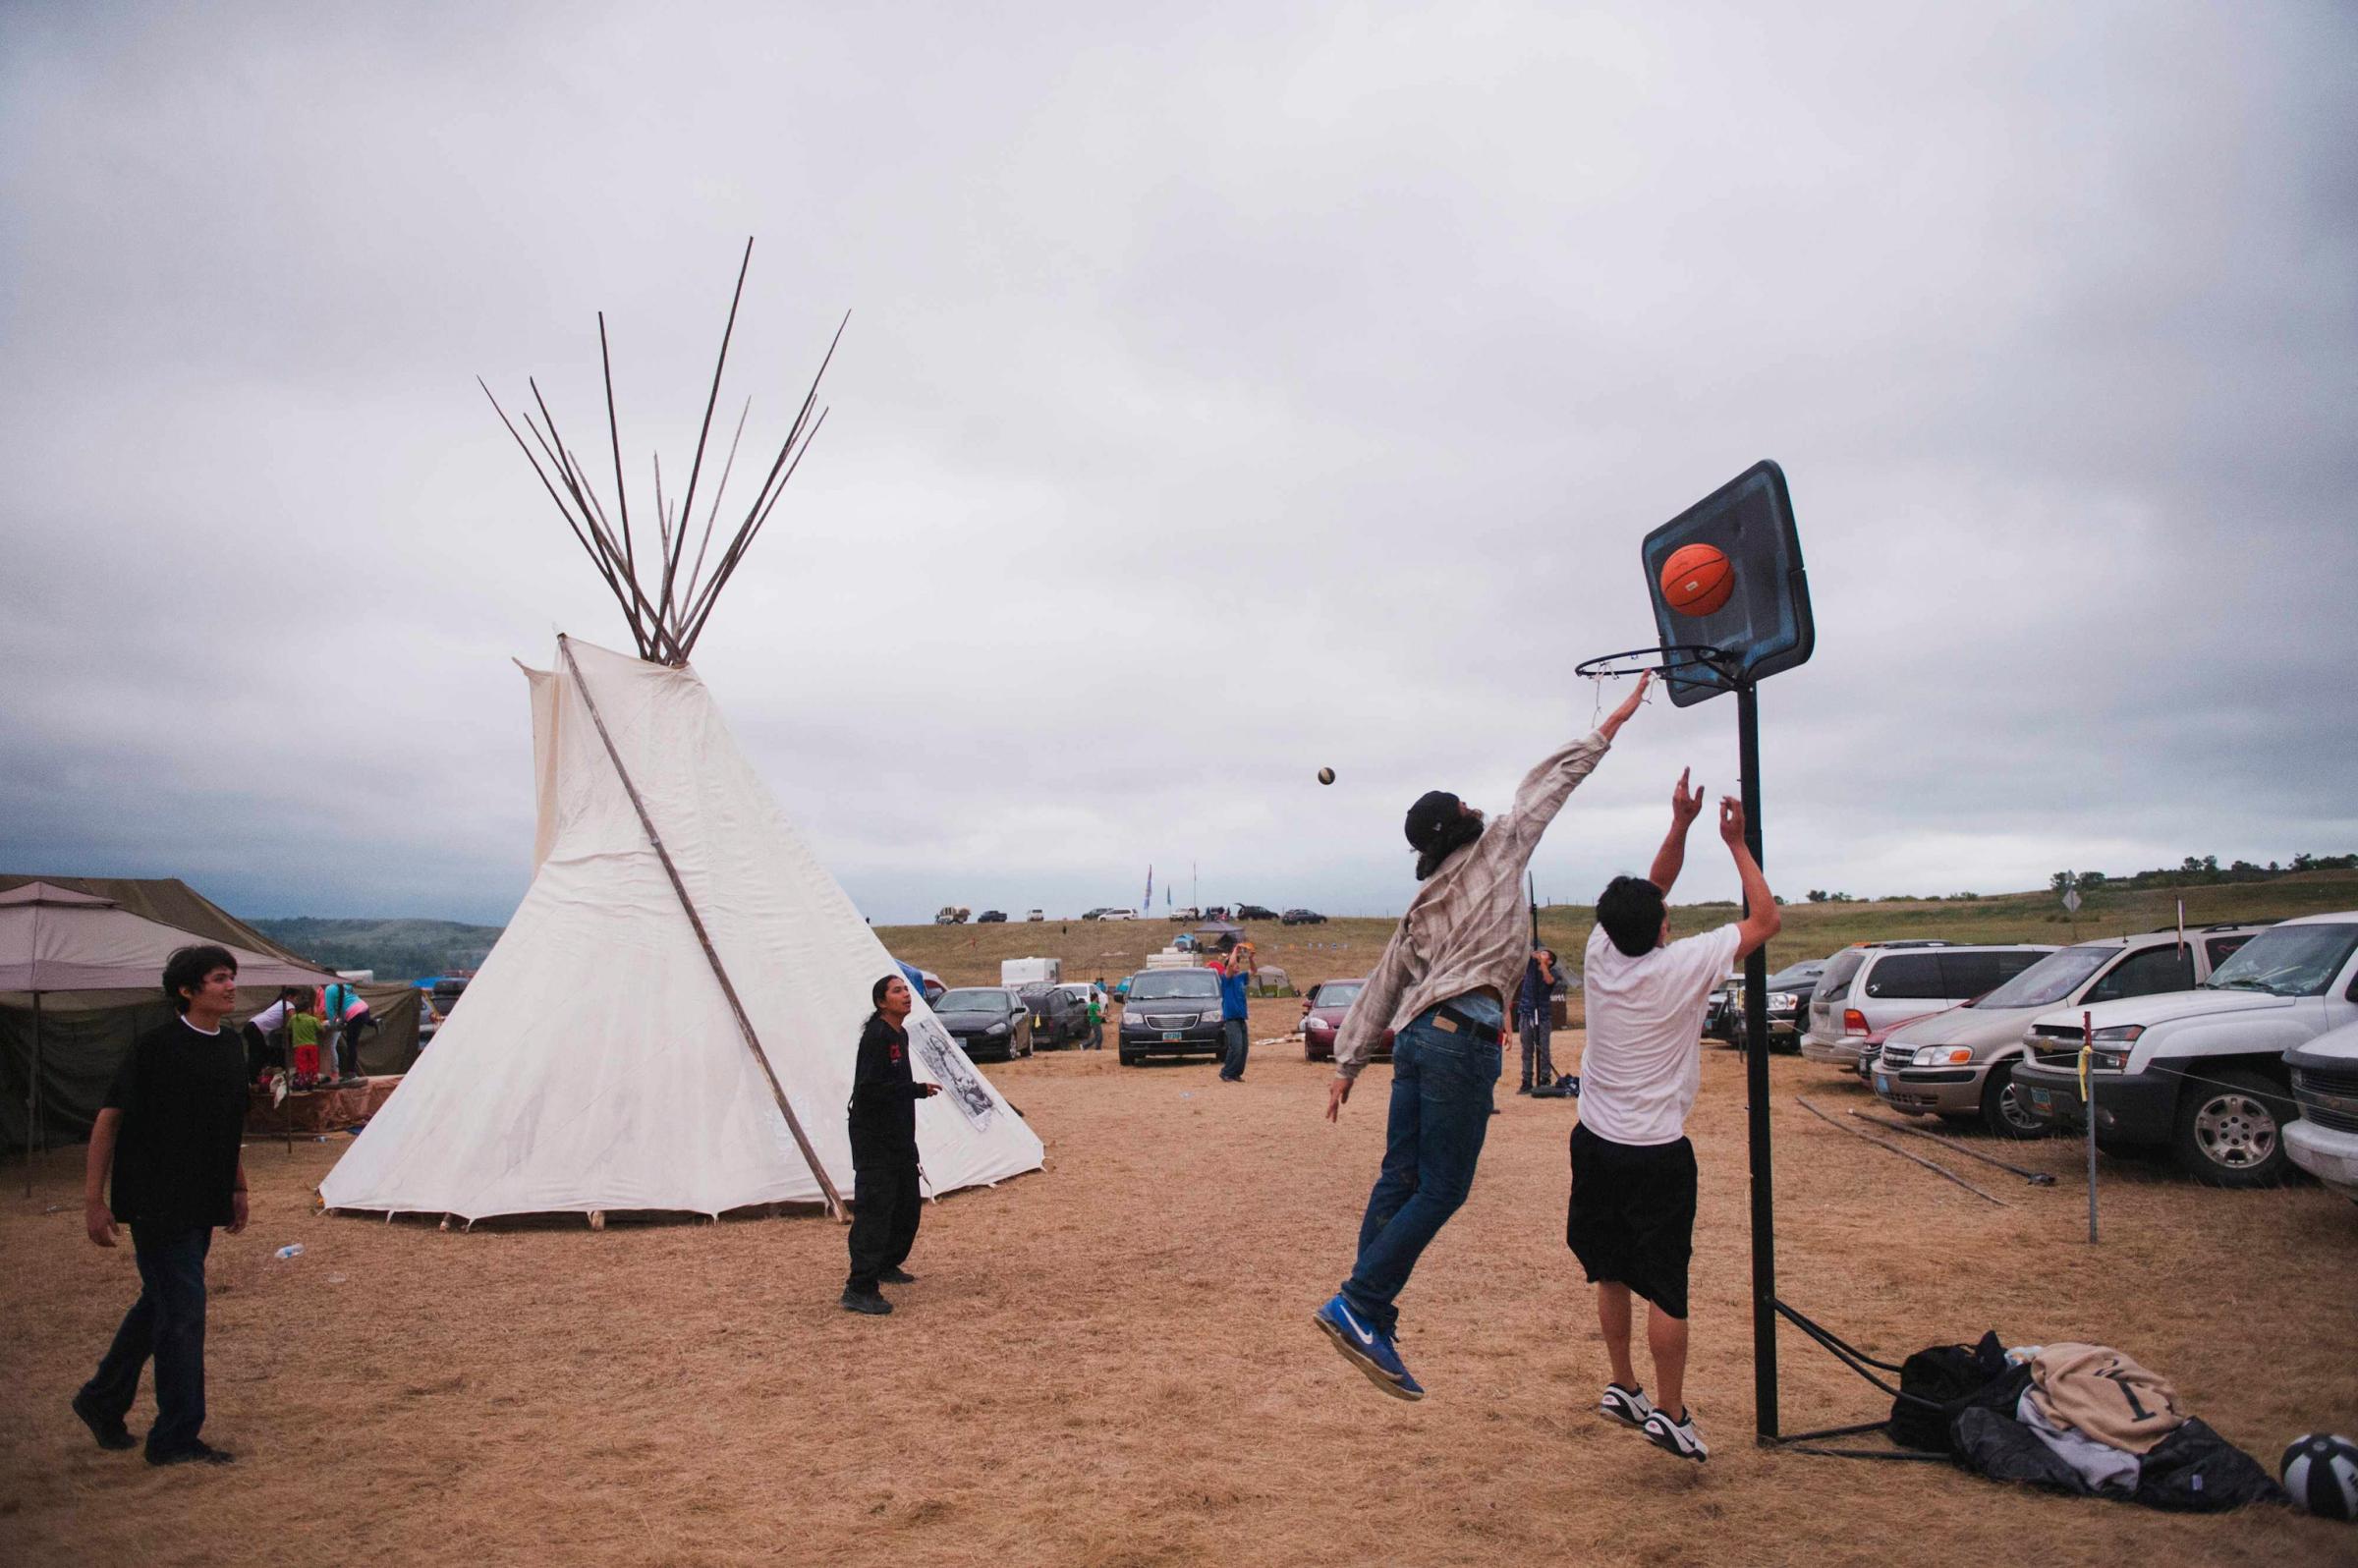 Native American protesters play basketball in an encampment that has grown on the banks of the Cannon Ball River in Cannon Ball, North Dakota, on Sept. 5, 2016.